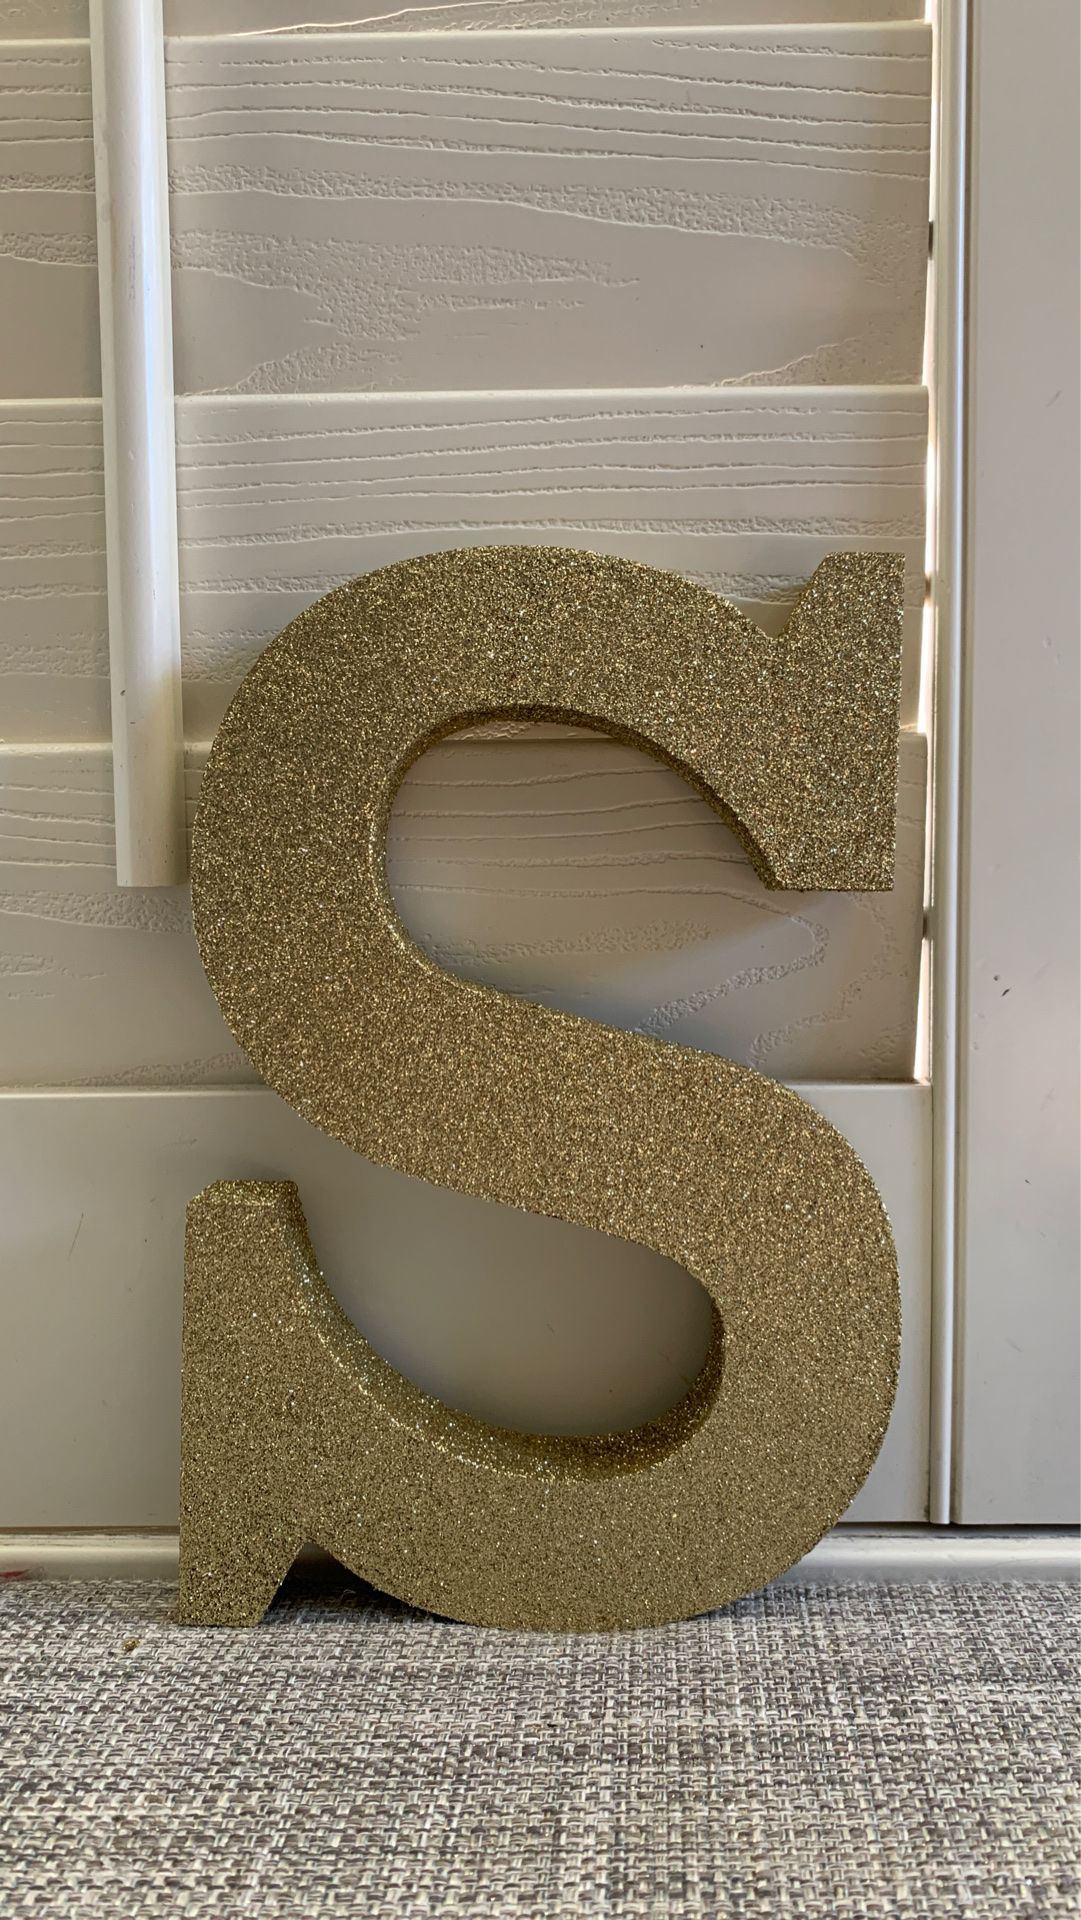 GOLD “S”